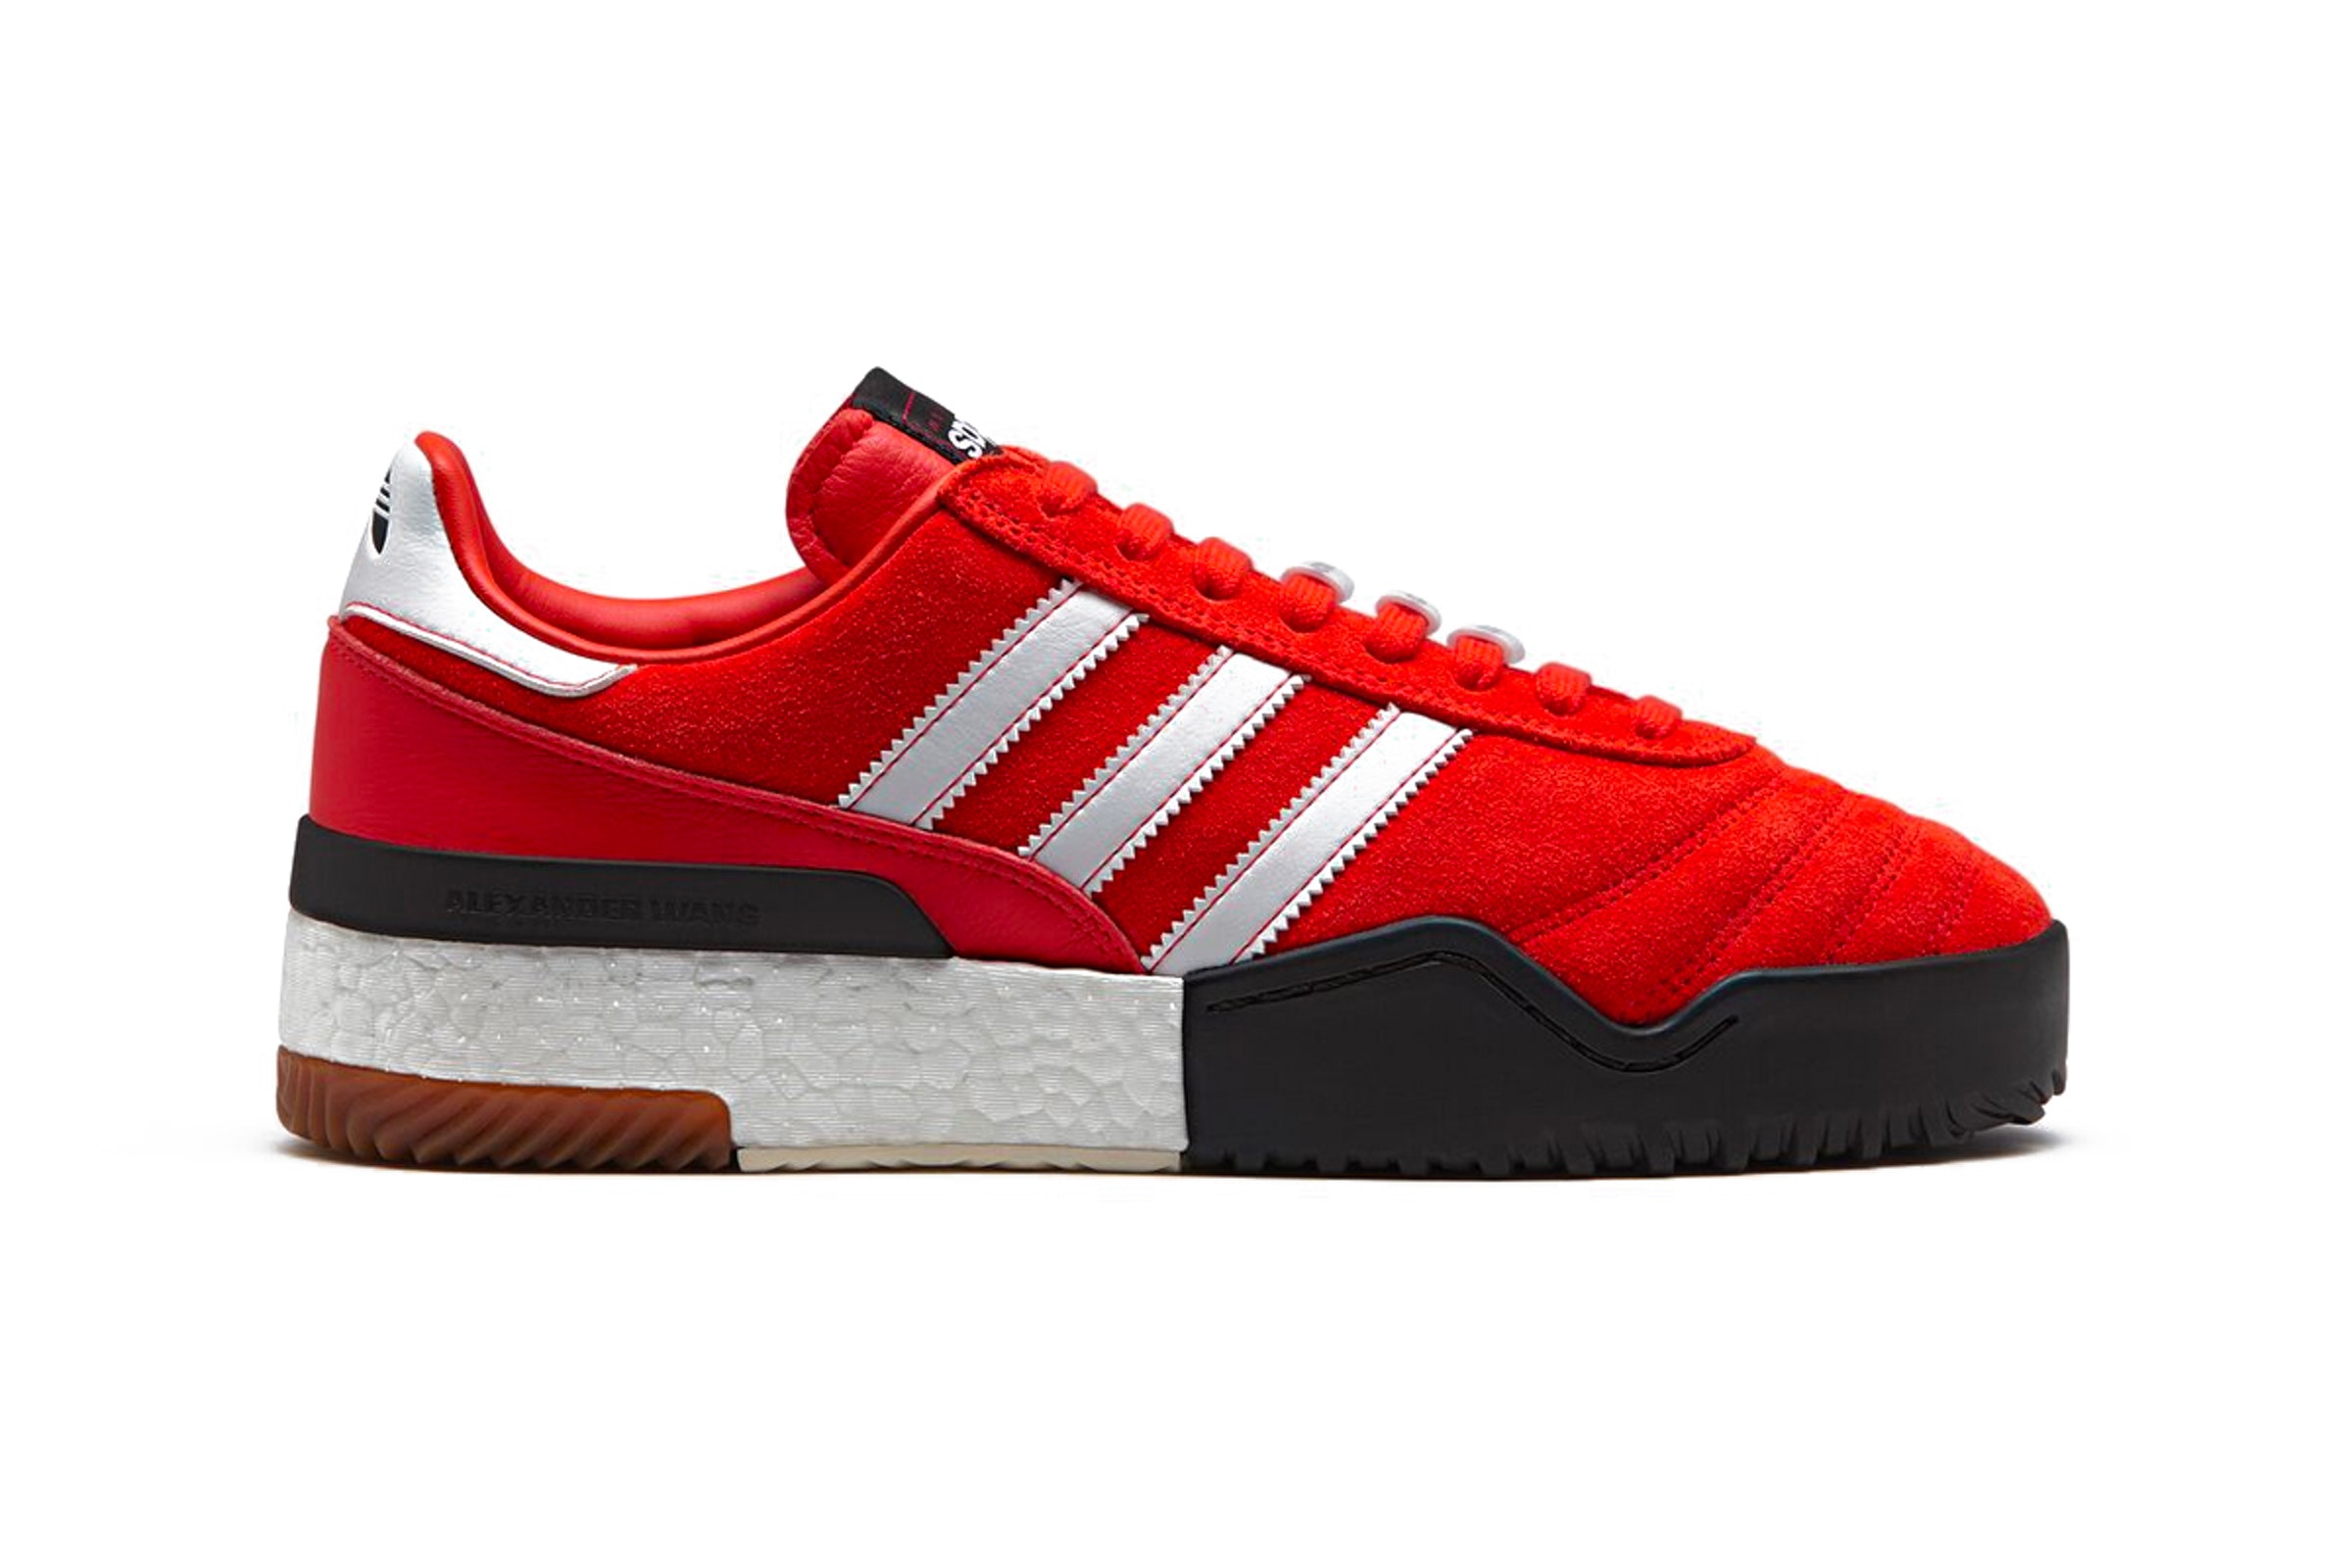 Now Available: Alexander Wang x adidas AW Soccer \